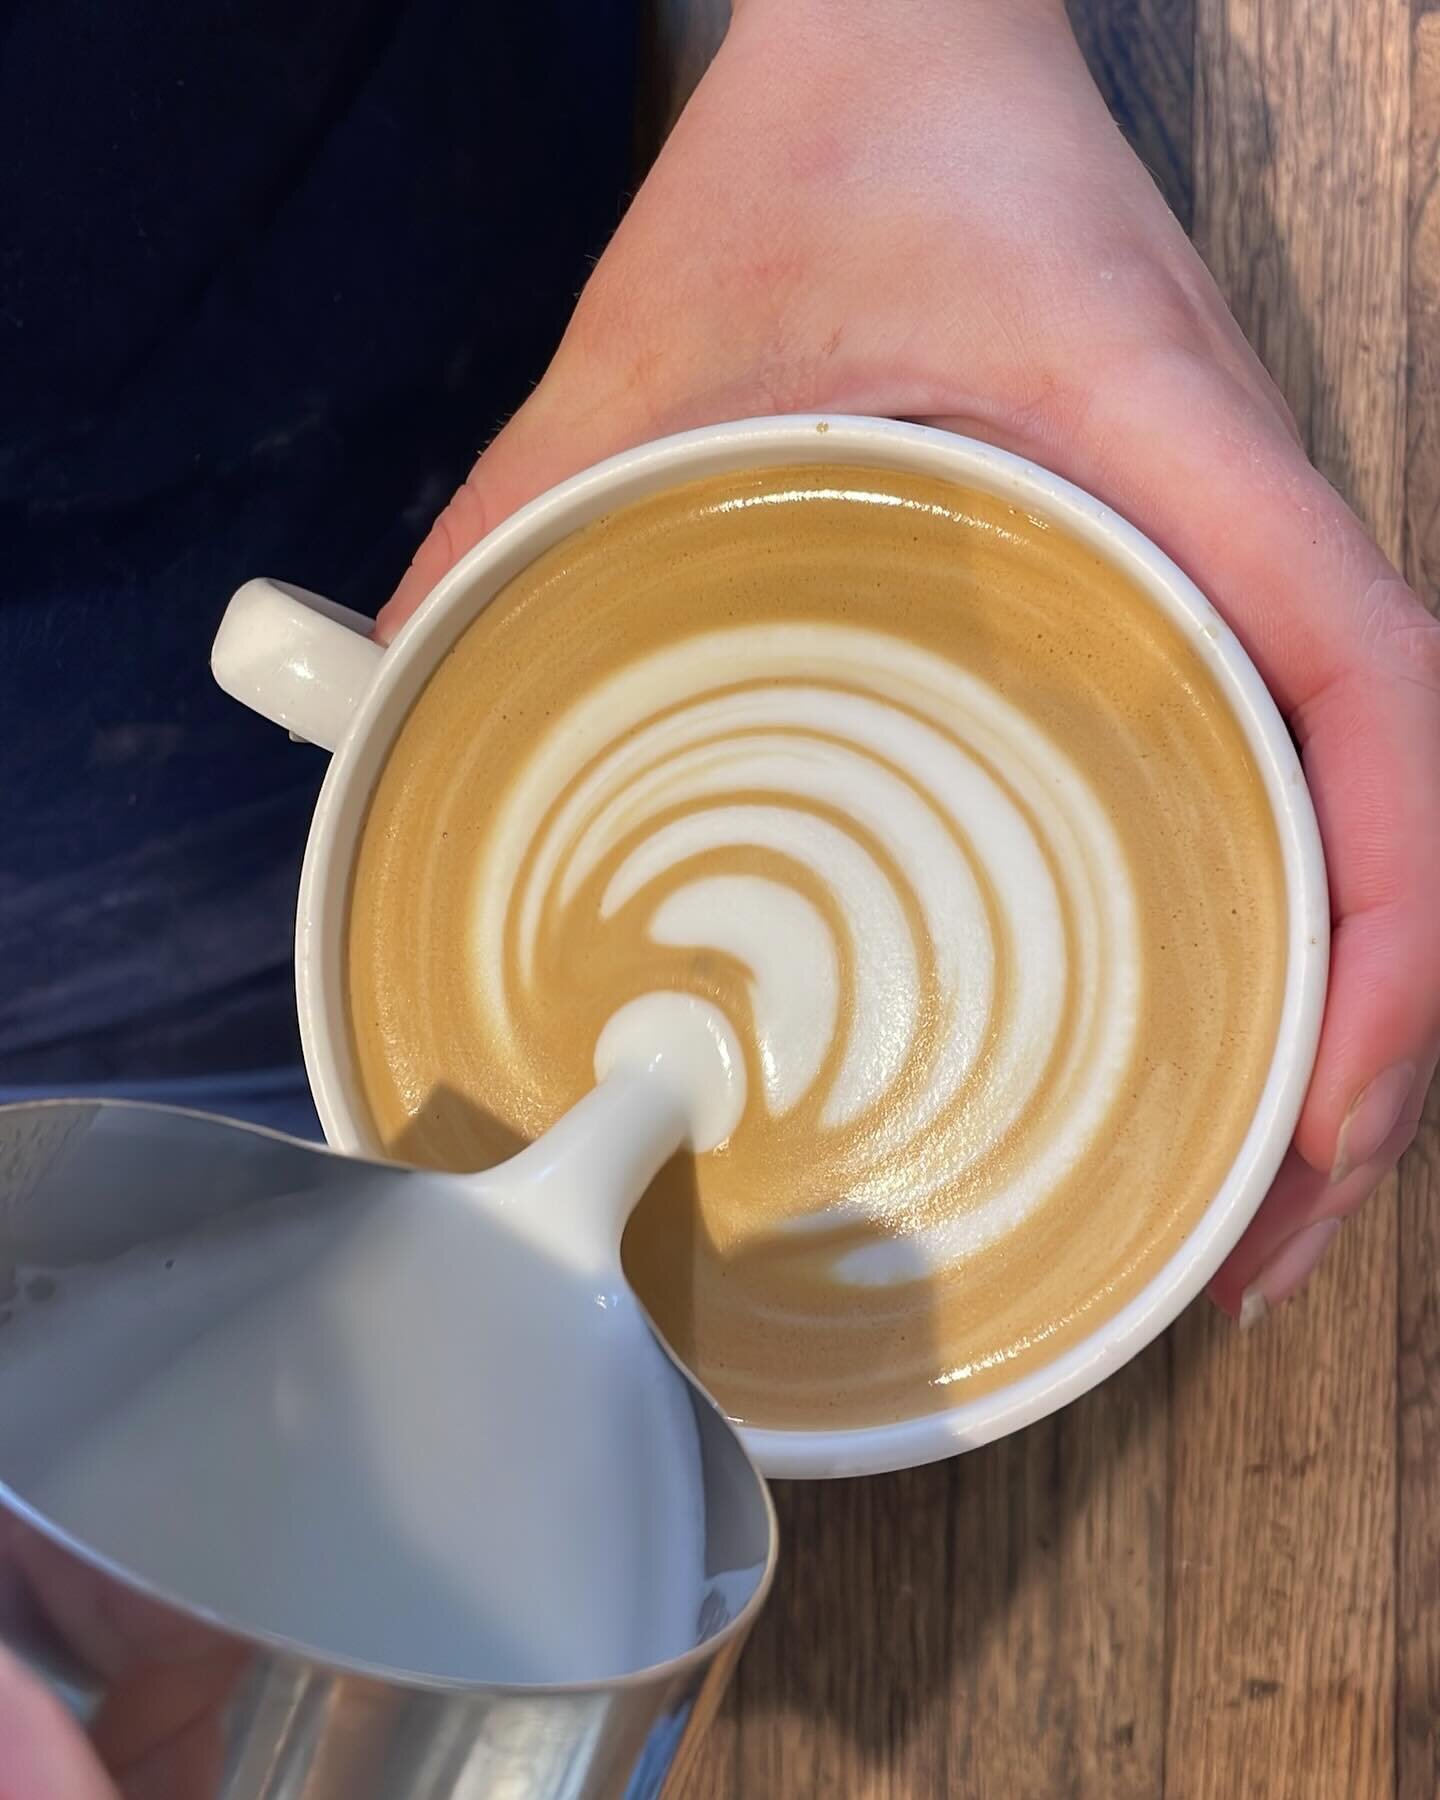 Capturing the artistry of crafting the perfect cup of coffee. ☕️✨ 

#coffeelover #coffeetime #bakeryonthehill #bakeryonthehillburford #cotswoldlife #cotswolds_culture #cotswoldsbakery #discovercotswolds